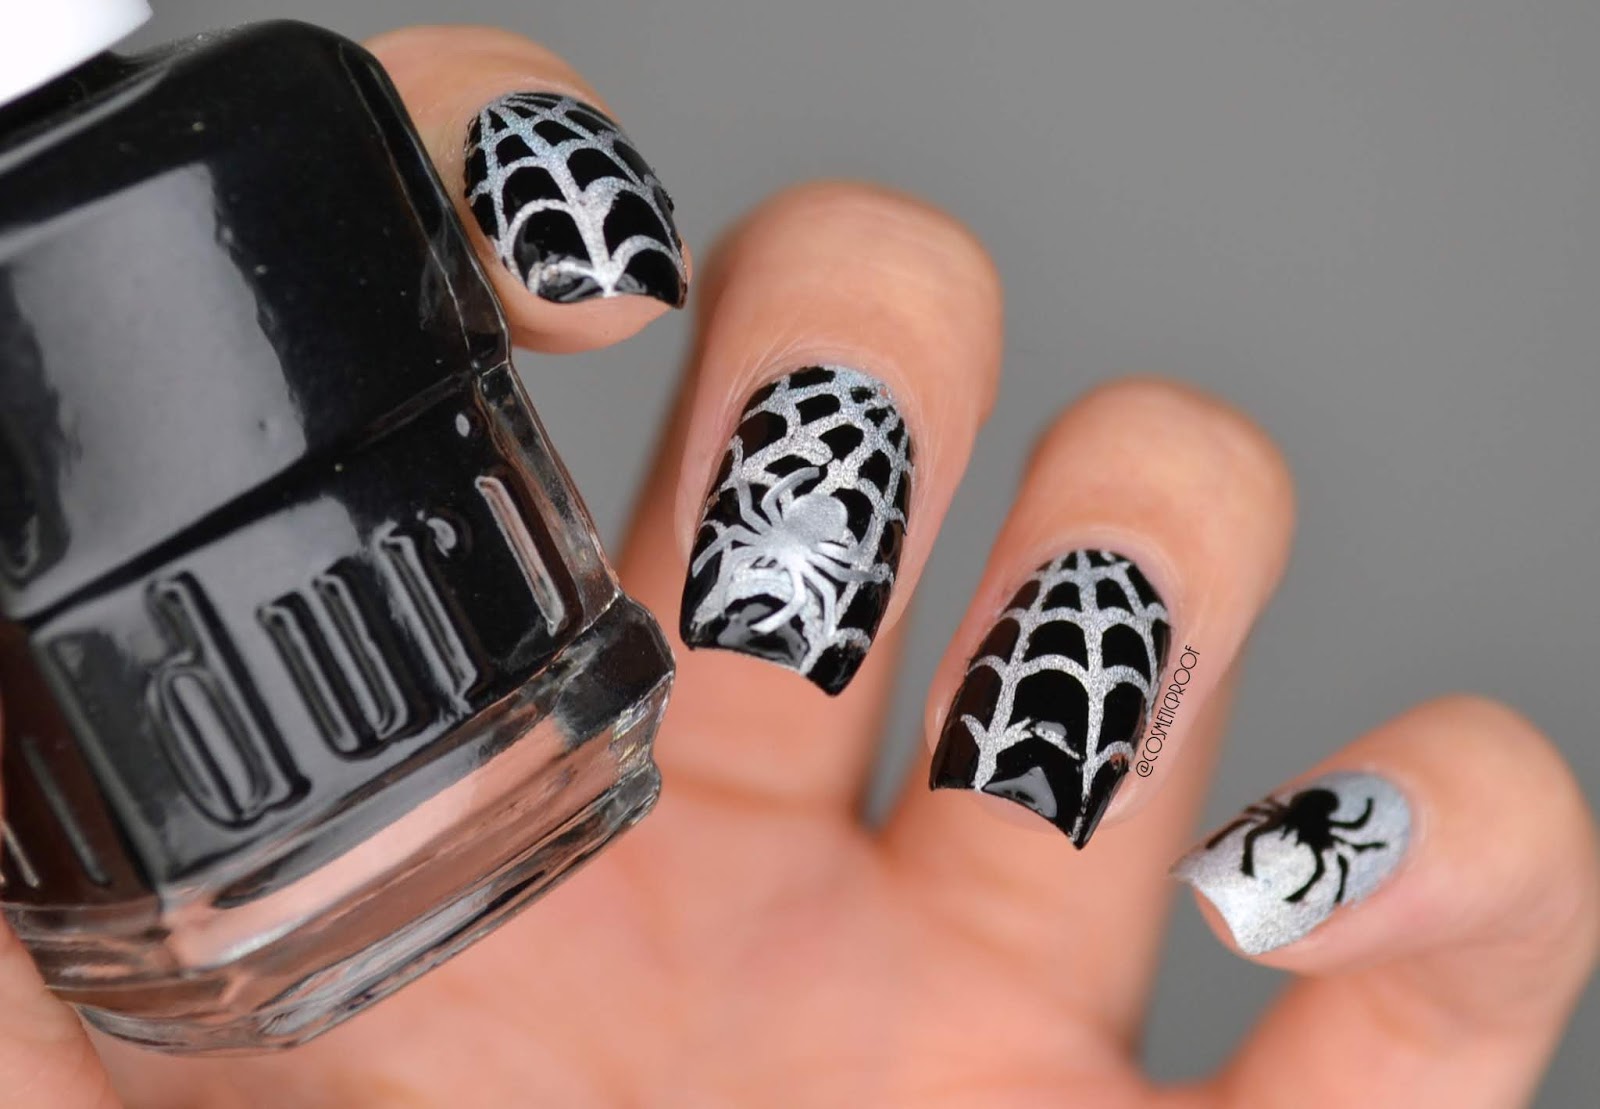 1. Spooky Spider Web Nails - wide 4